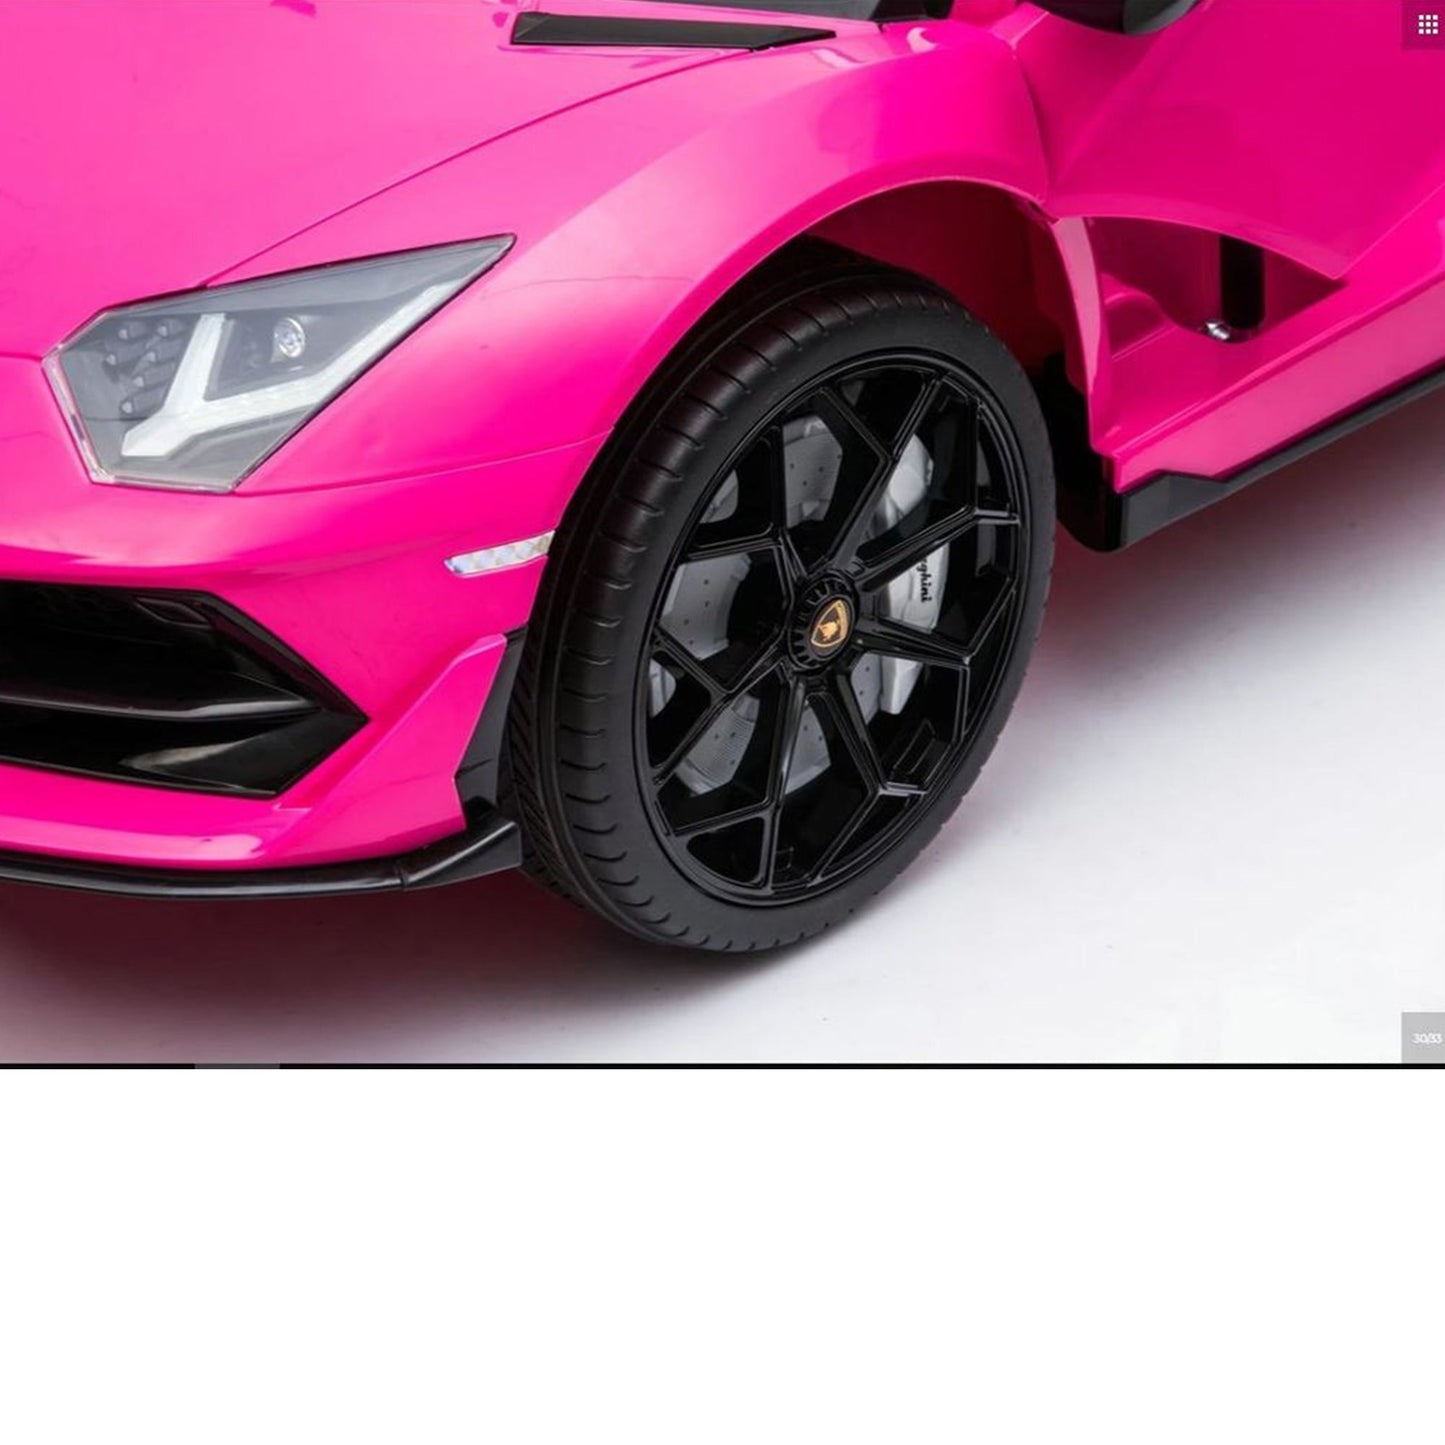 "LAMBORGHINI brand Pink Lamborghini SVJ 12 Volt Electric ride-on car for kids with 2.4G Parent Remote from my store"